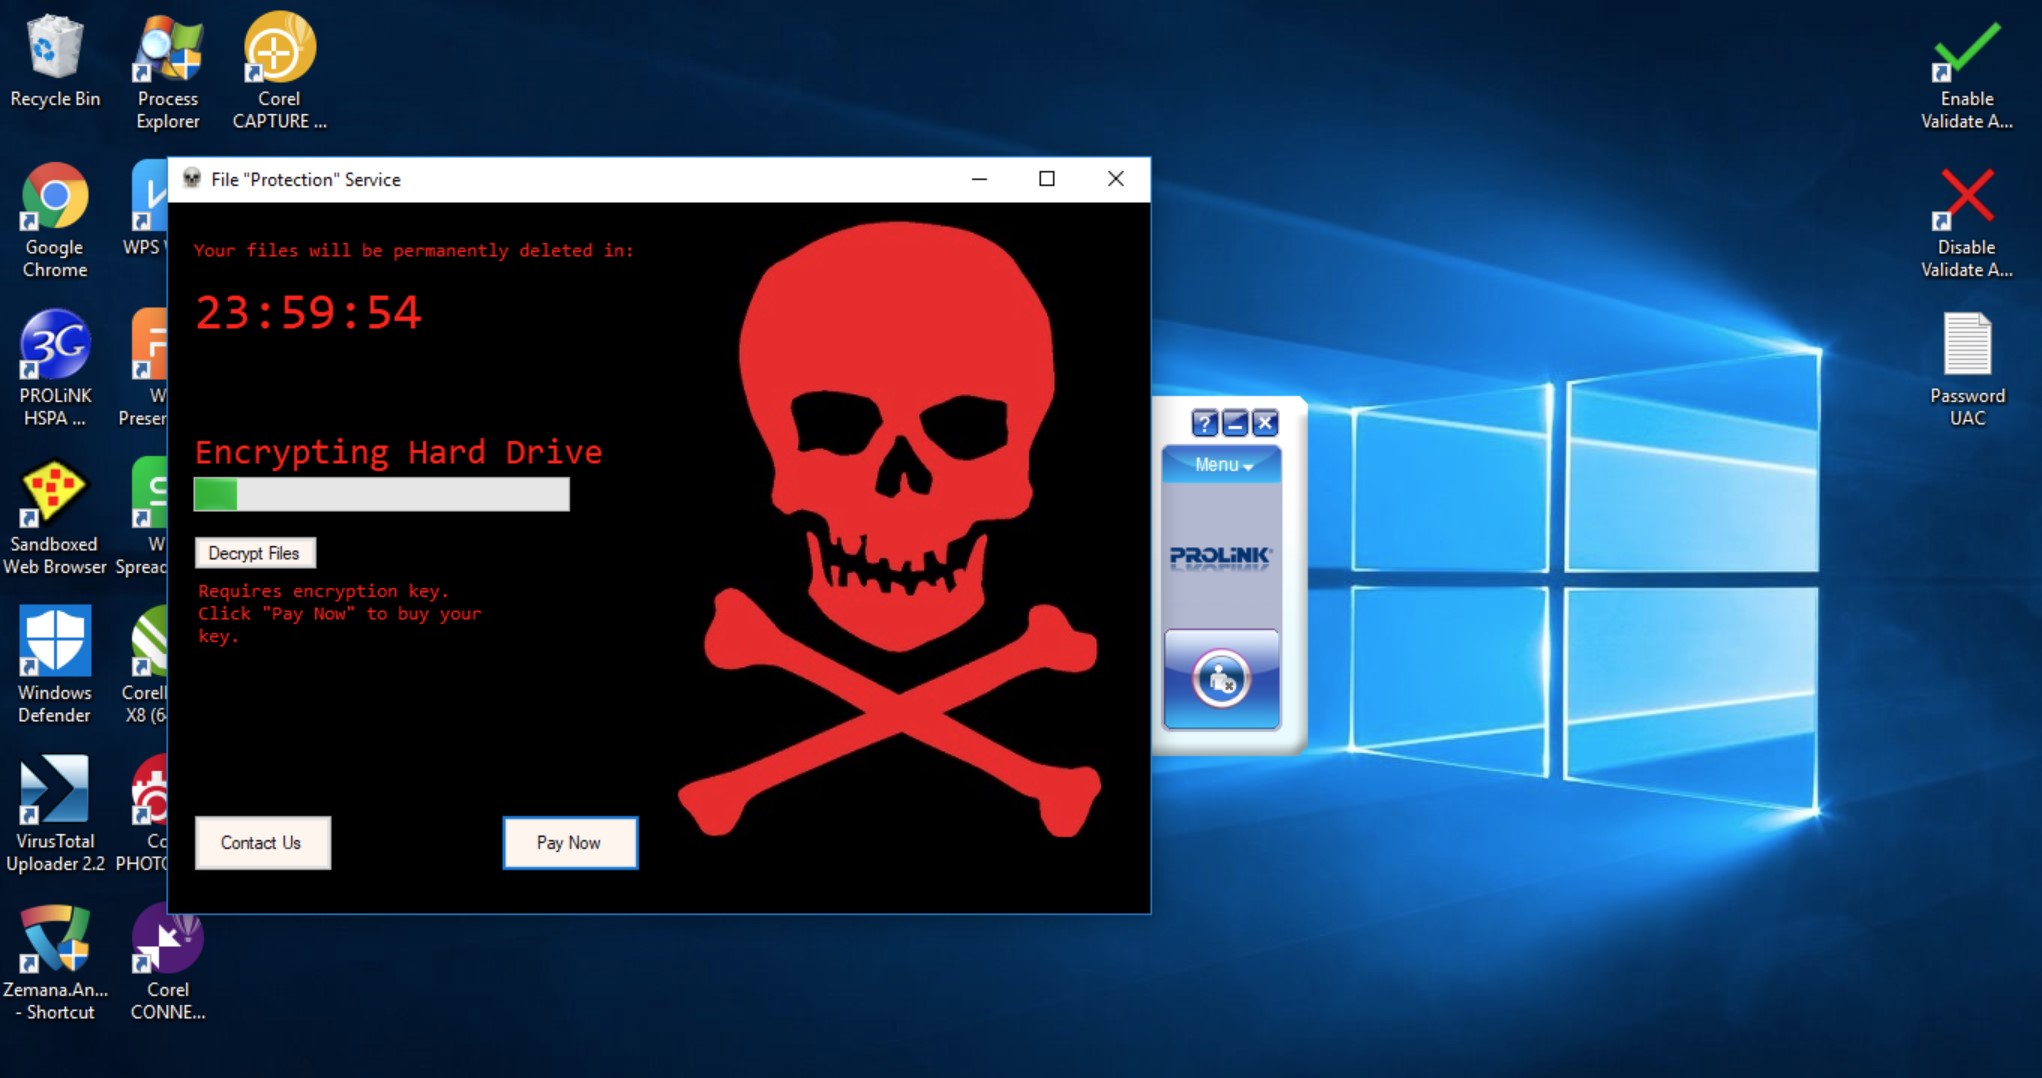 Is Windows Security good enough to foil the bad guys?